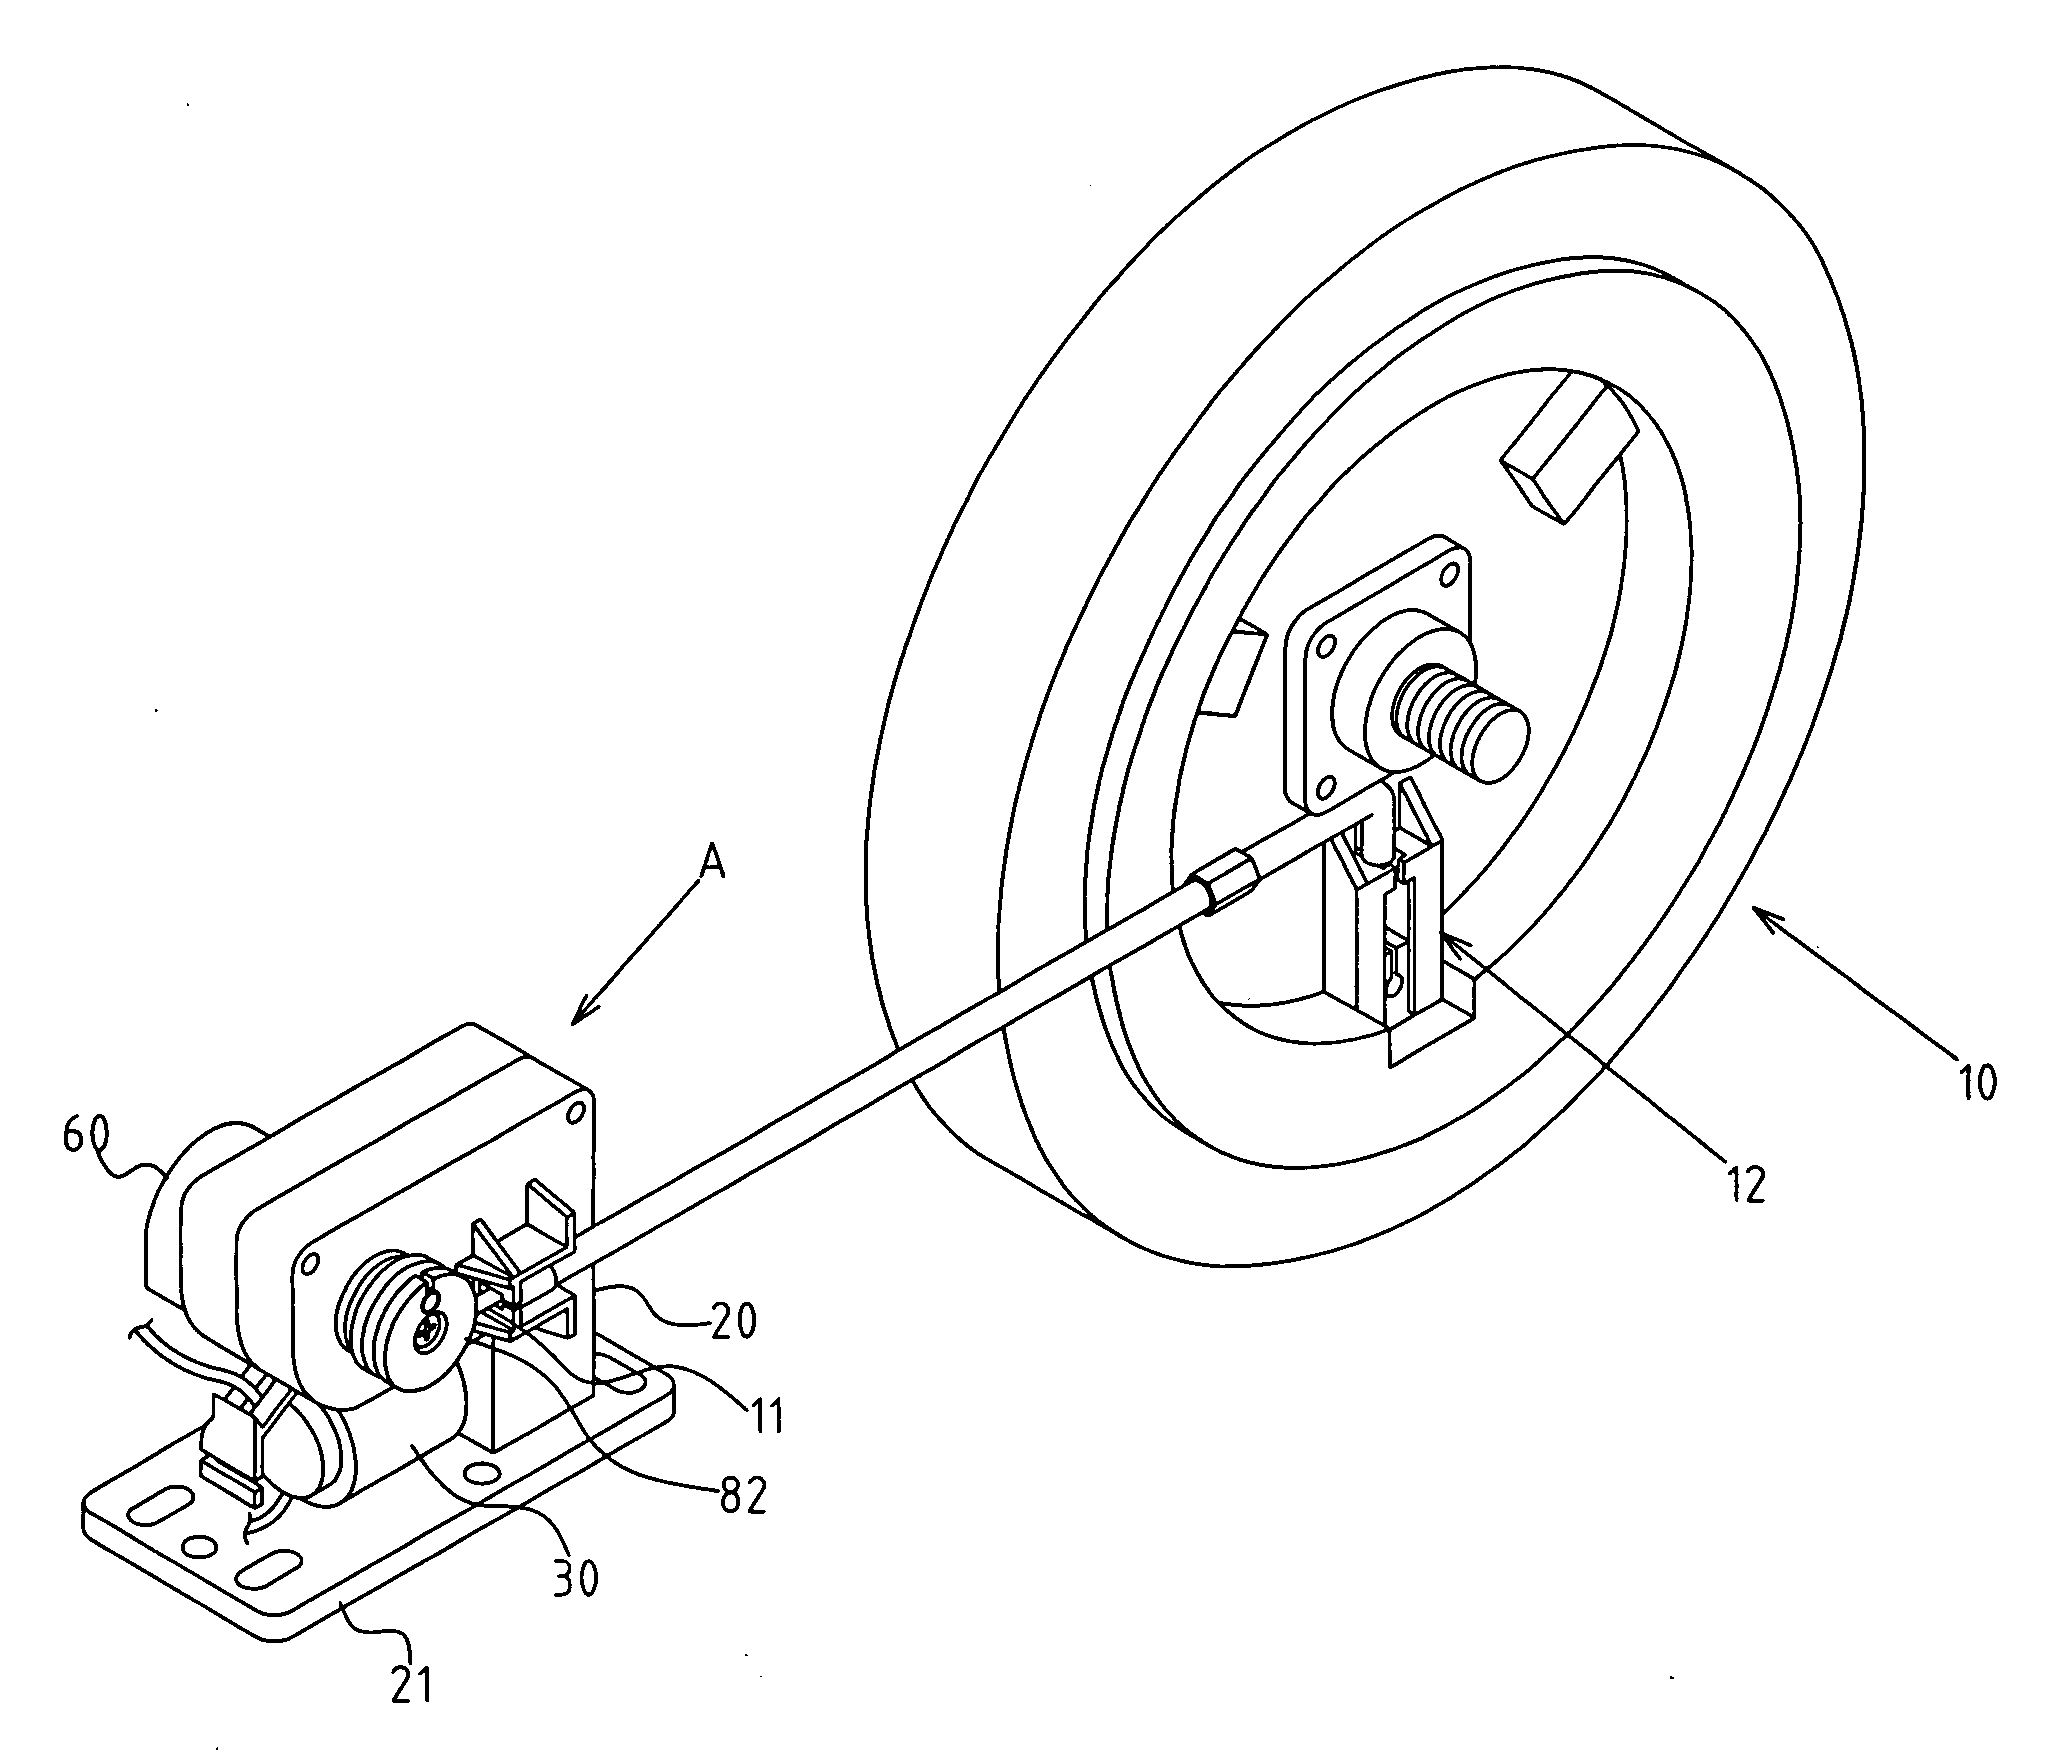 Controller for magnetic wheels